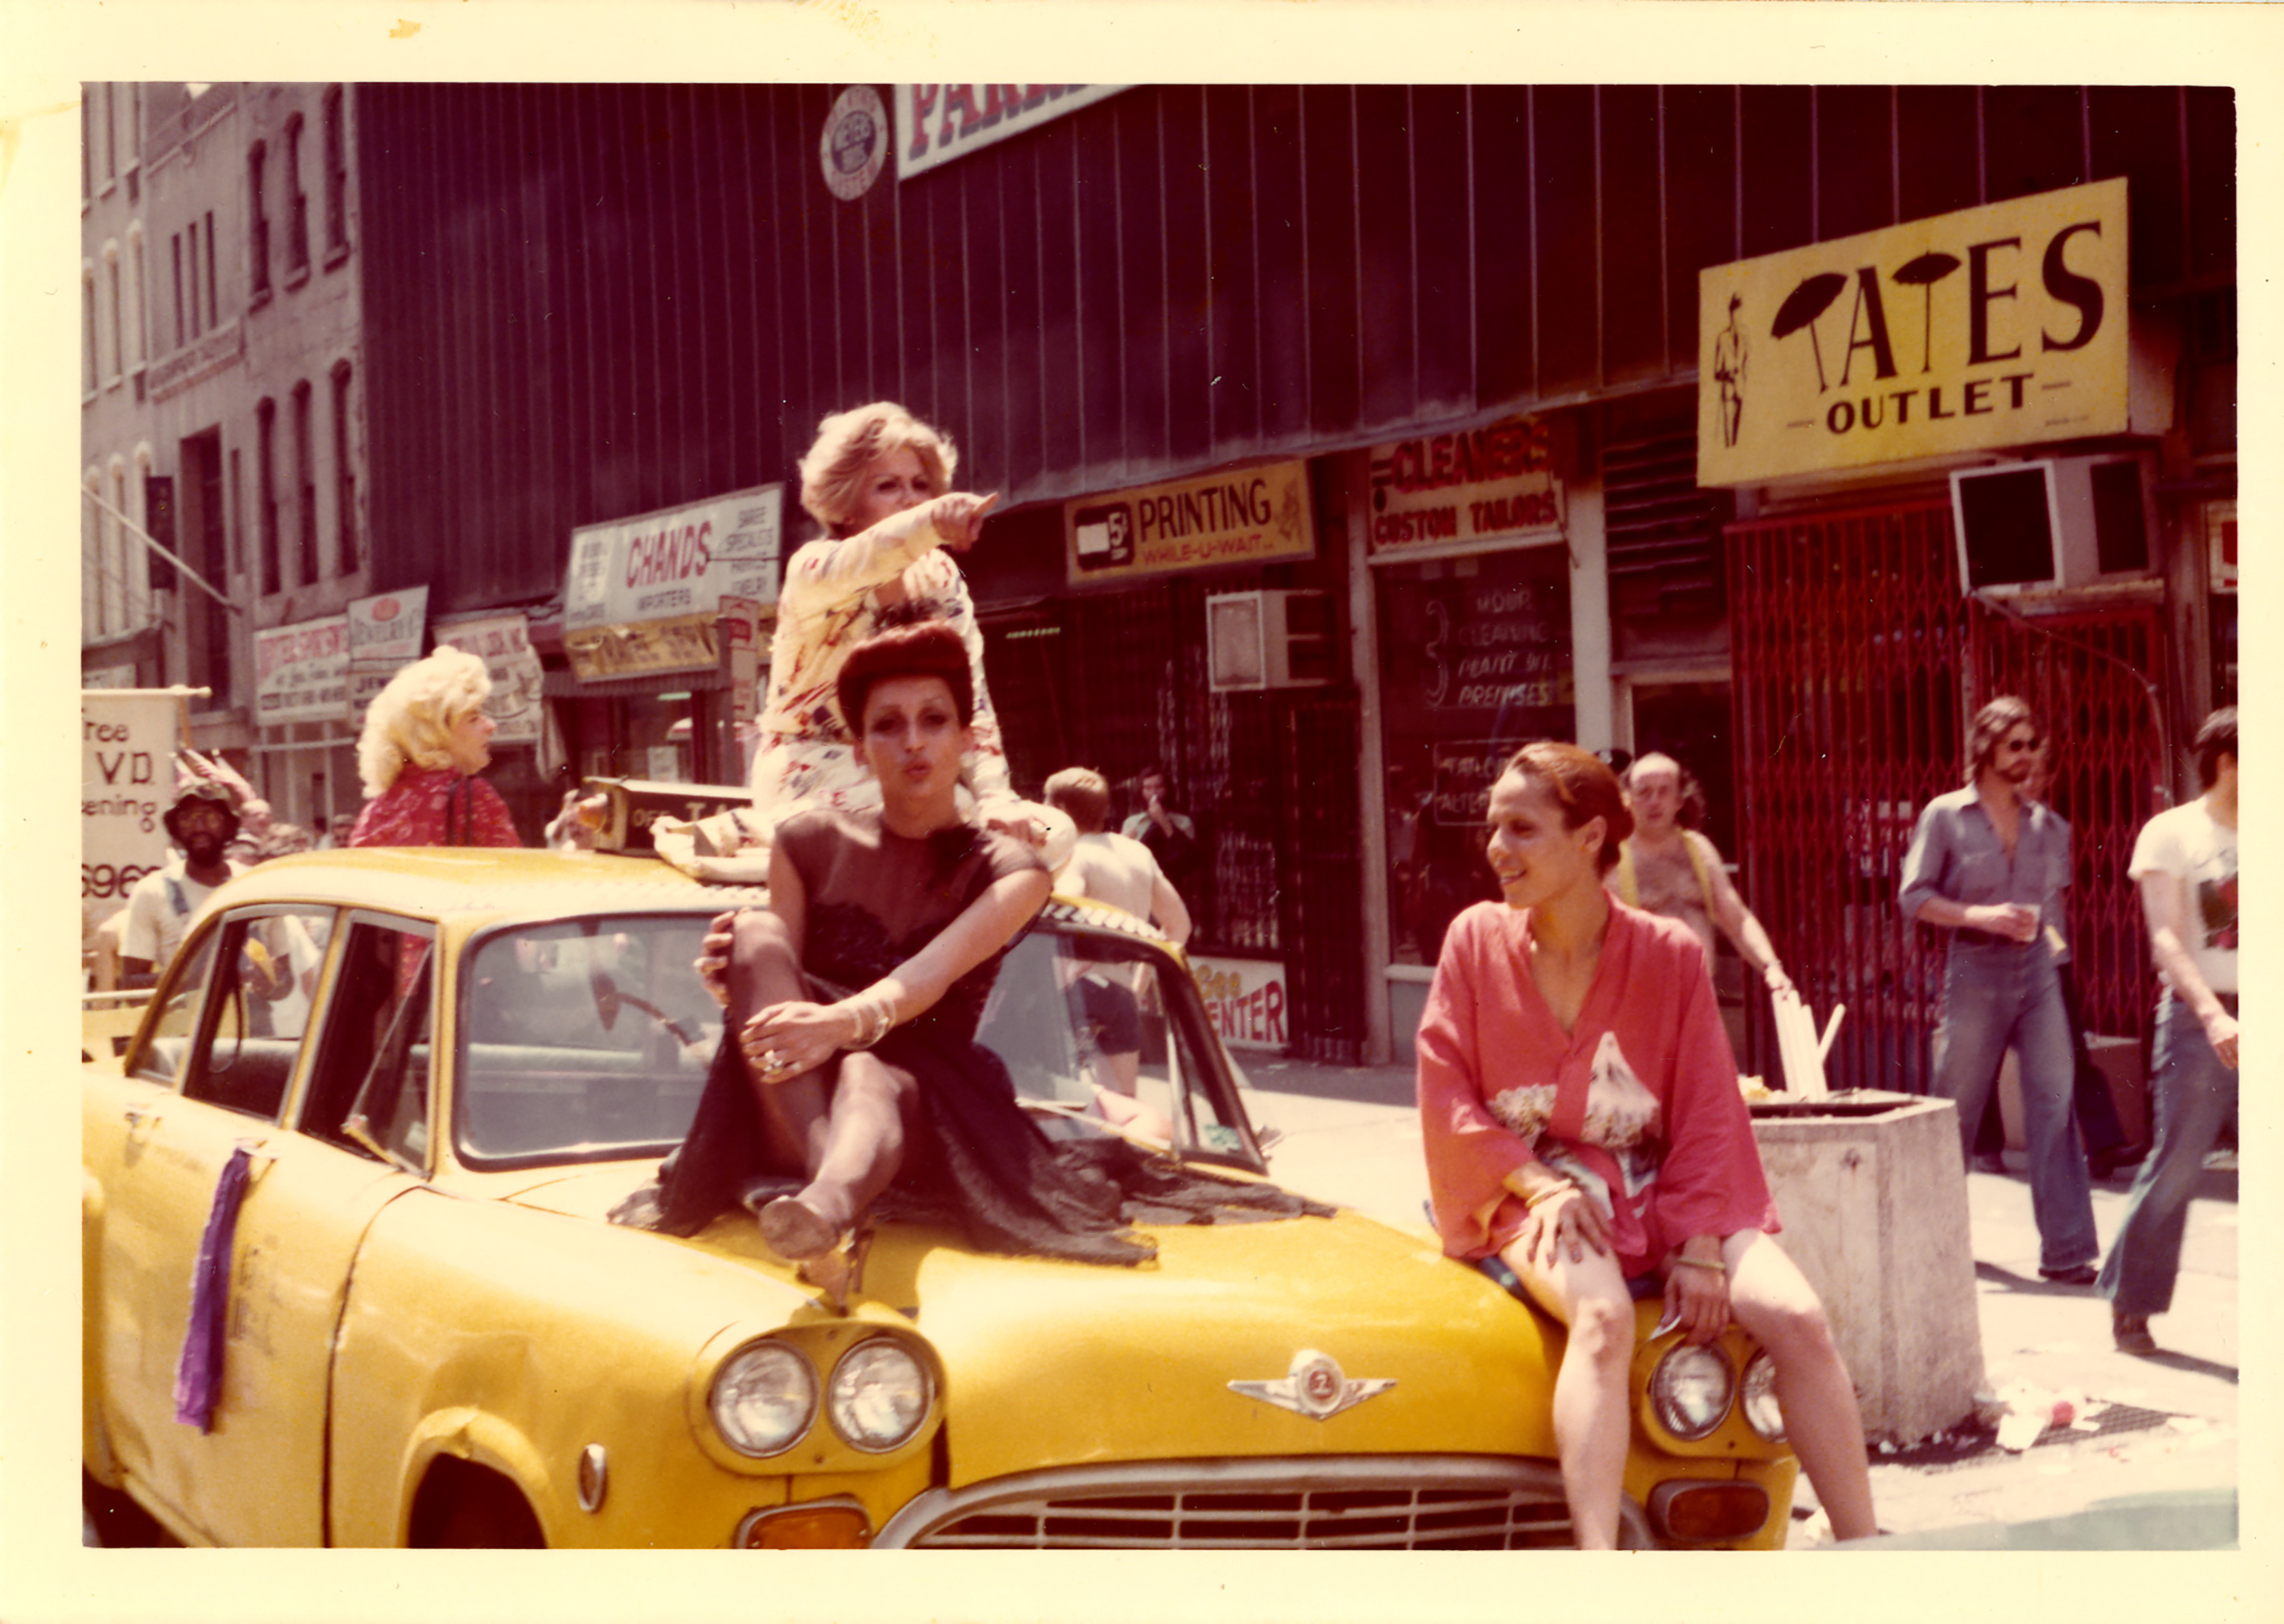 People perform on top of a yellow cab in 1976 (Courtesy of the Estate of George Dudley and the Leslie-Lohman Museum)